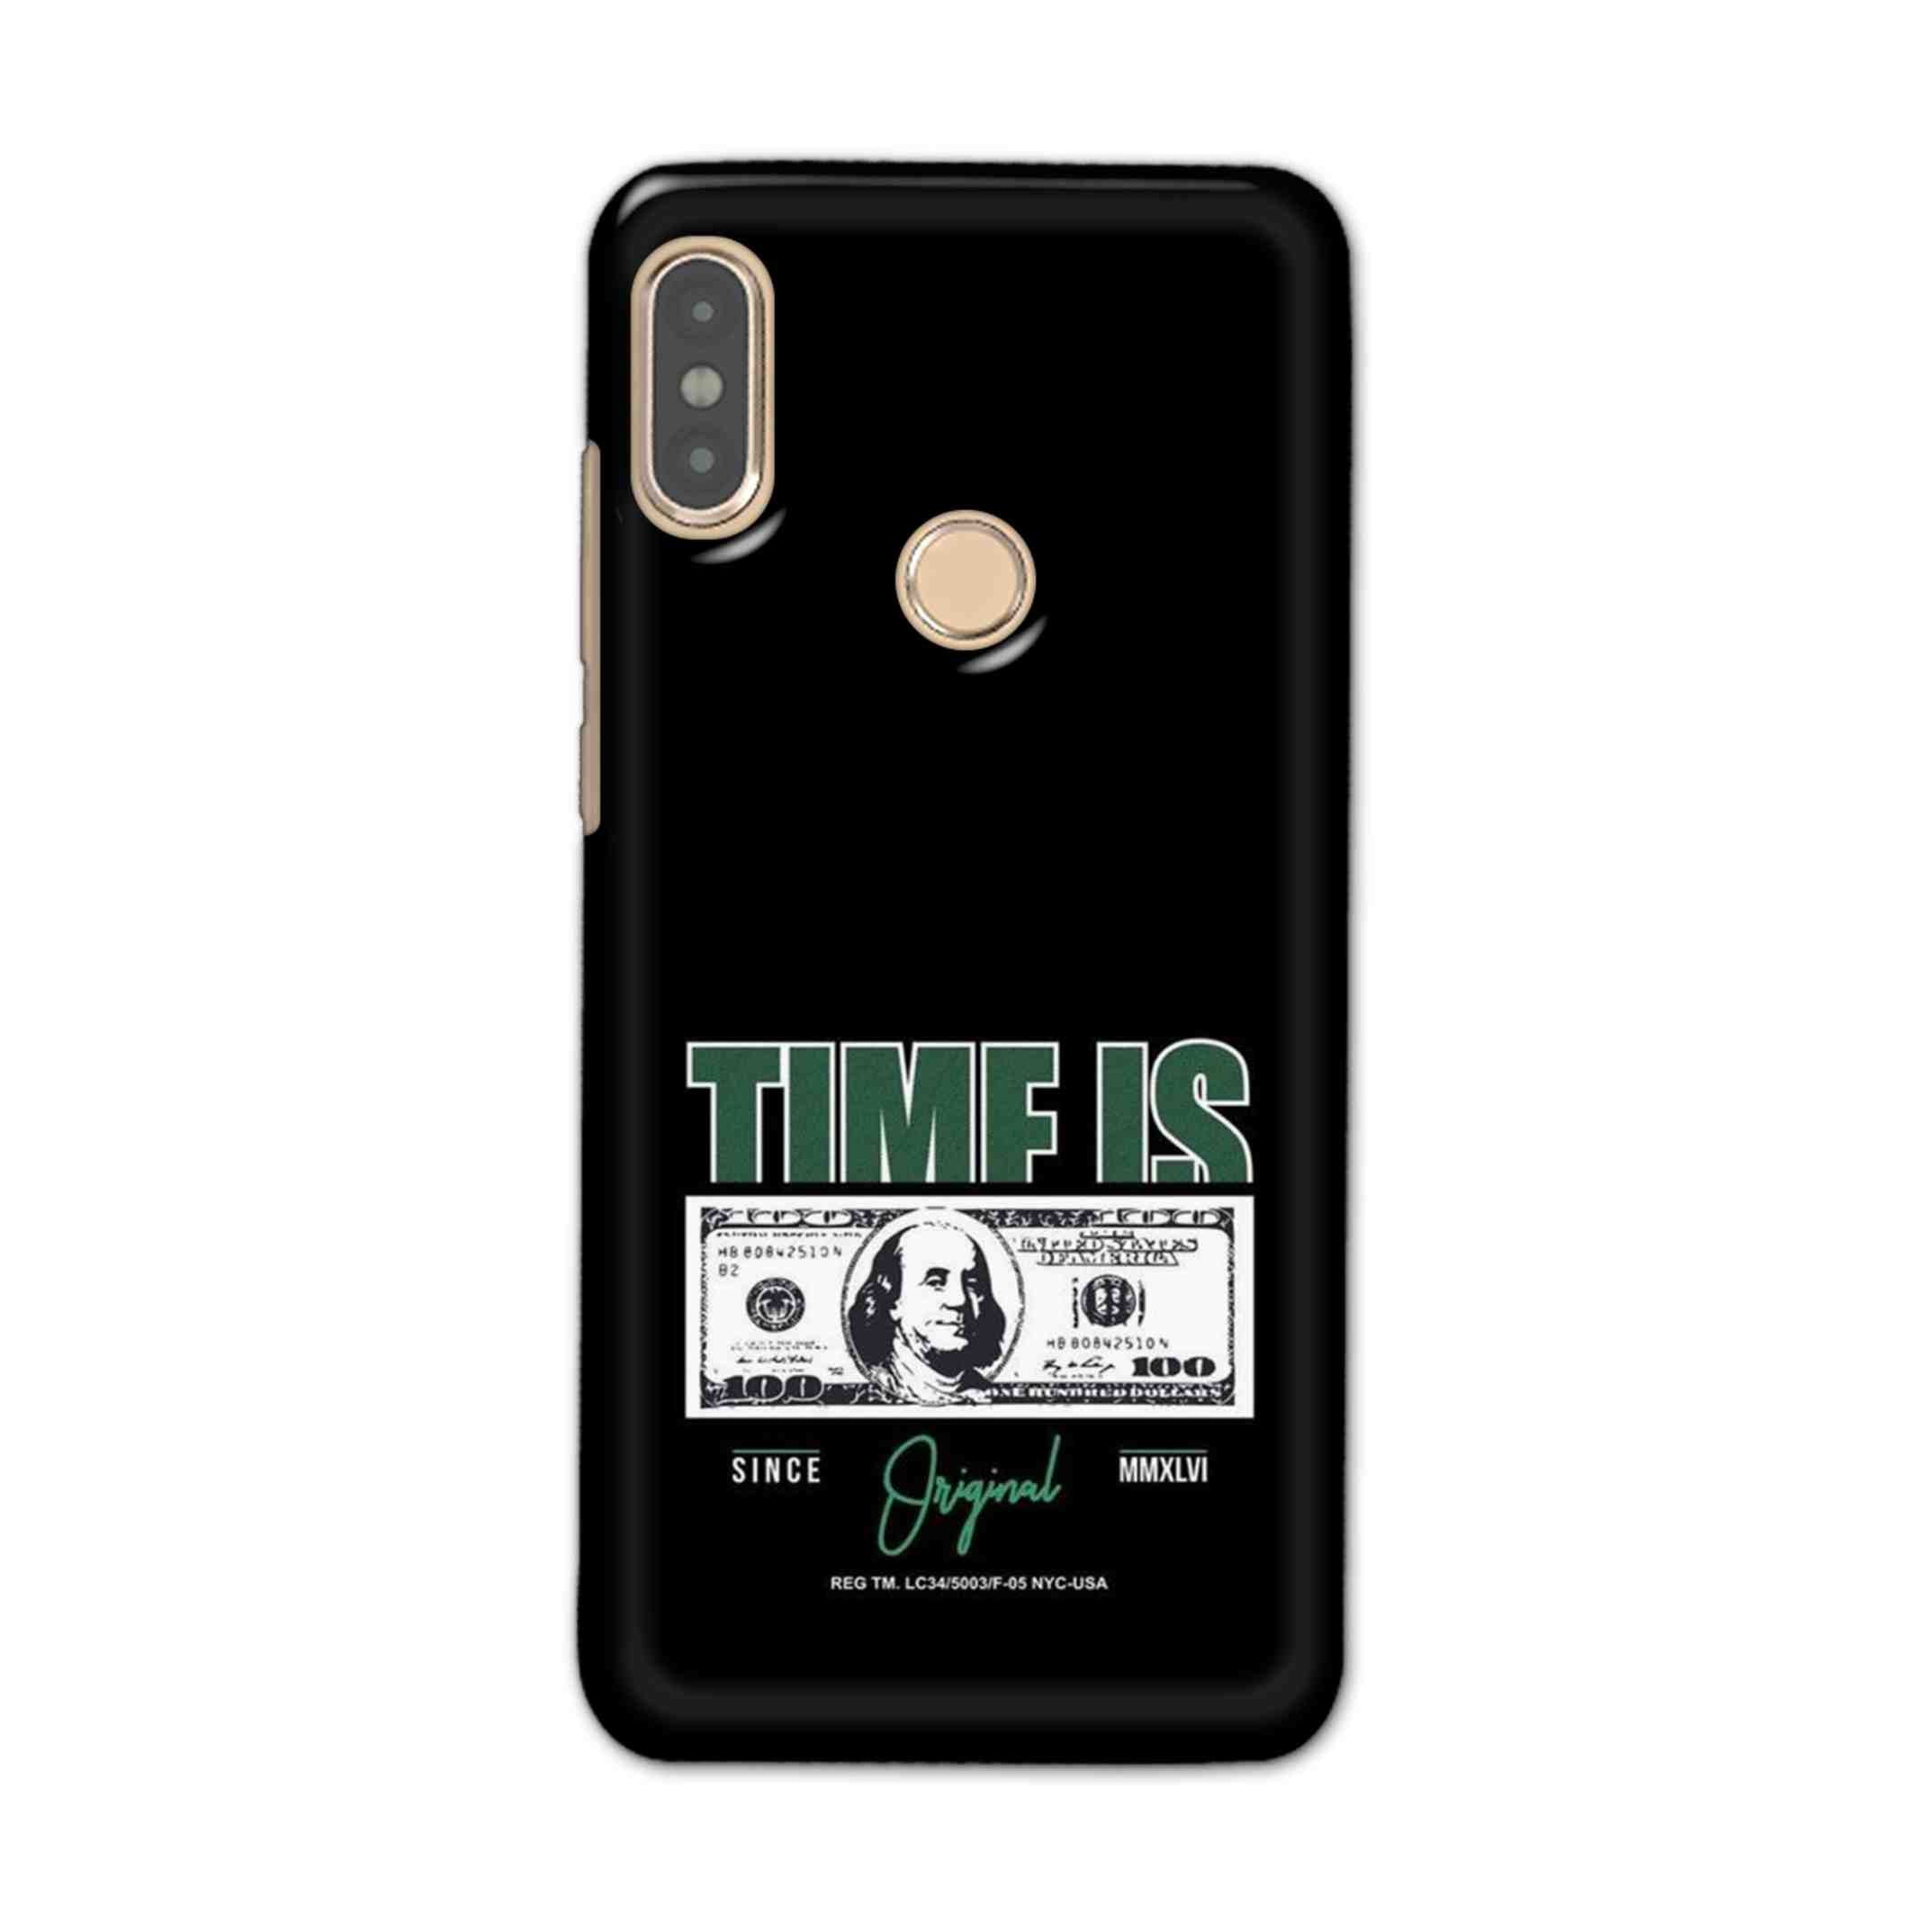 Buy Time Is Money Hard Back Mobile Phone Case Cover For Xiaomi Redmi Note 5 Pro Online